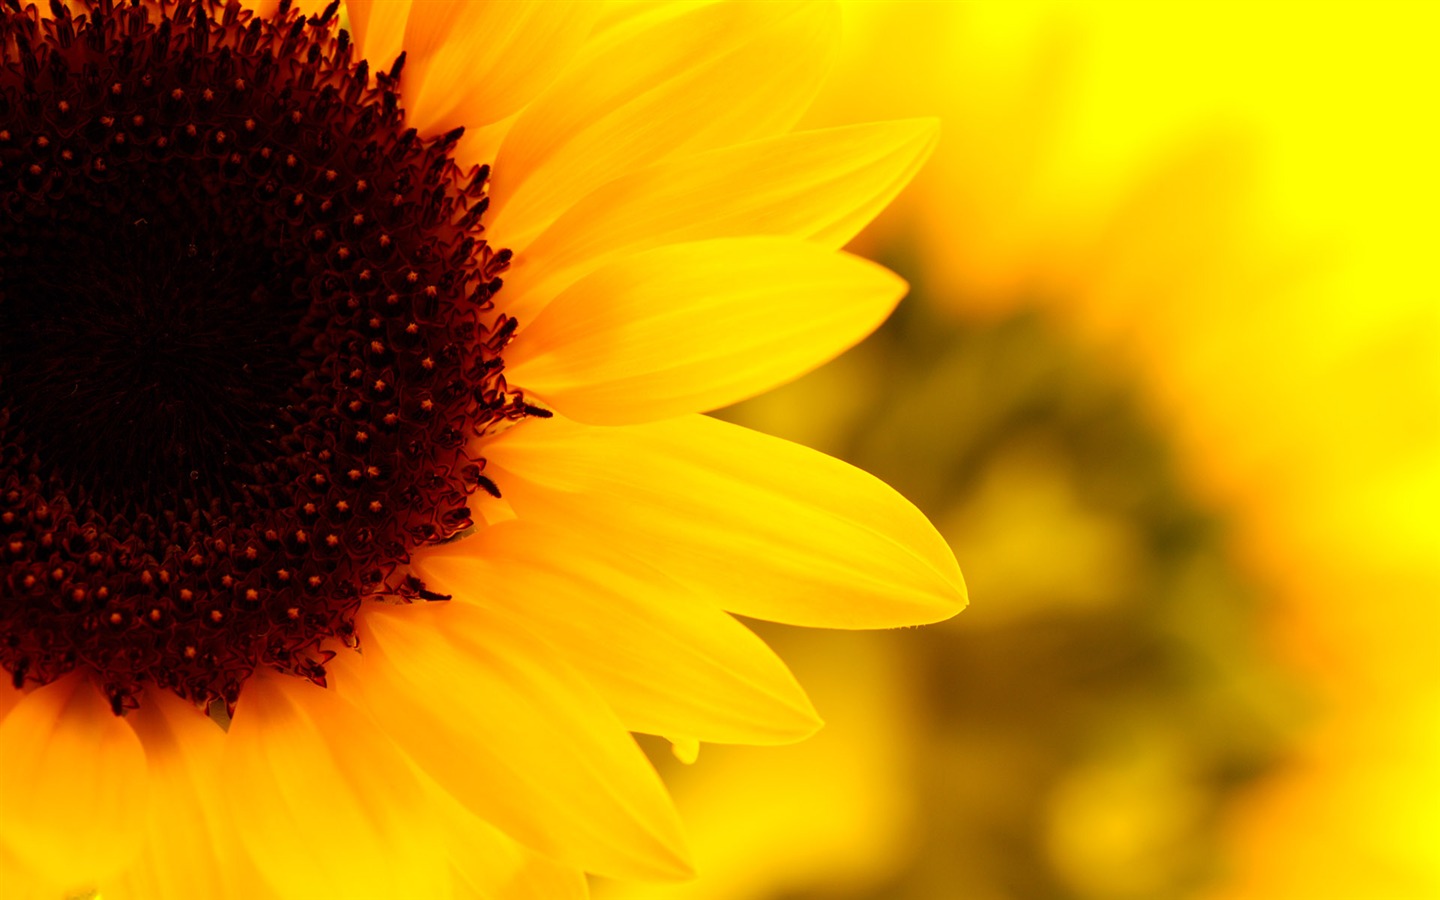 Sunny sunflower photo HD Wallpapers #10 - 1440x900